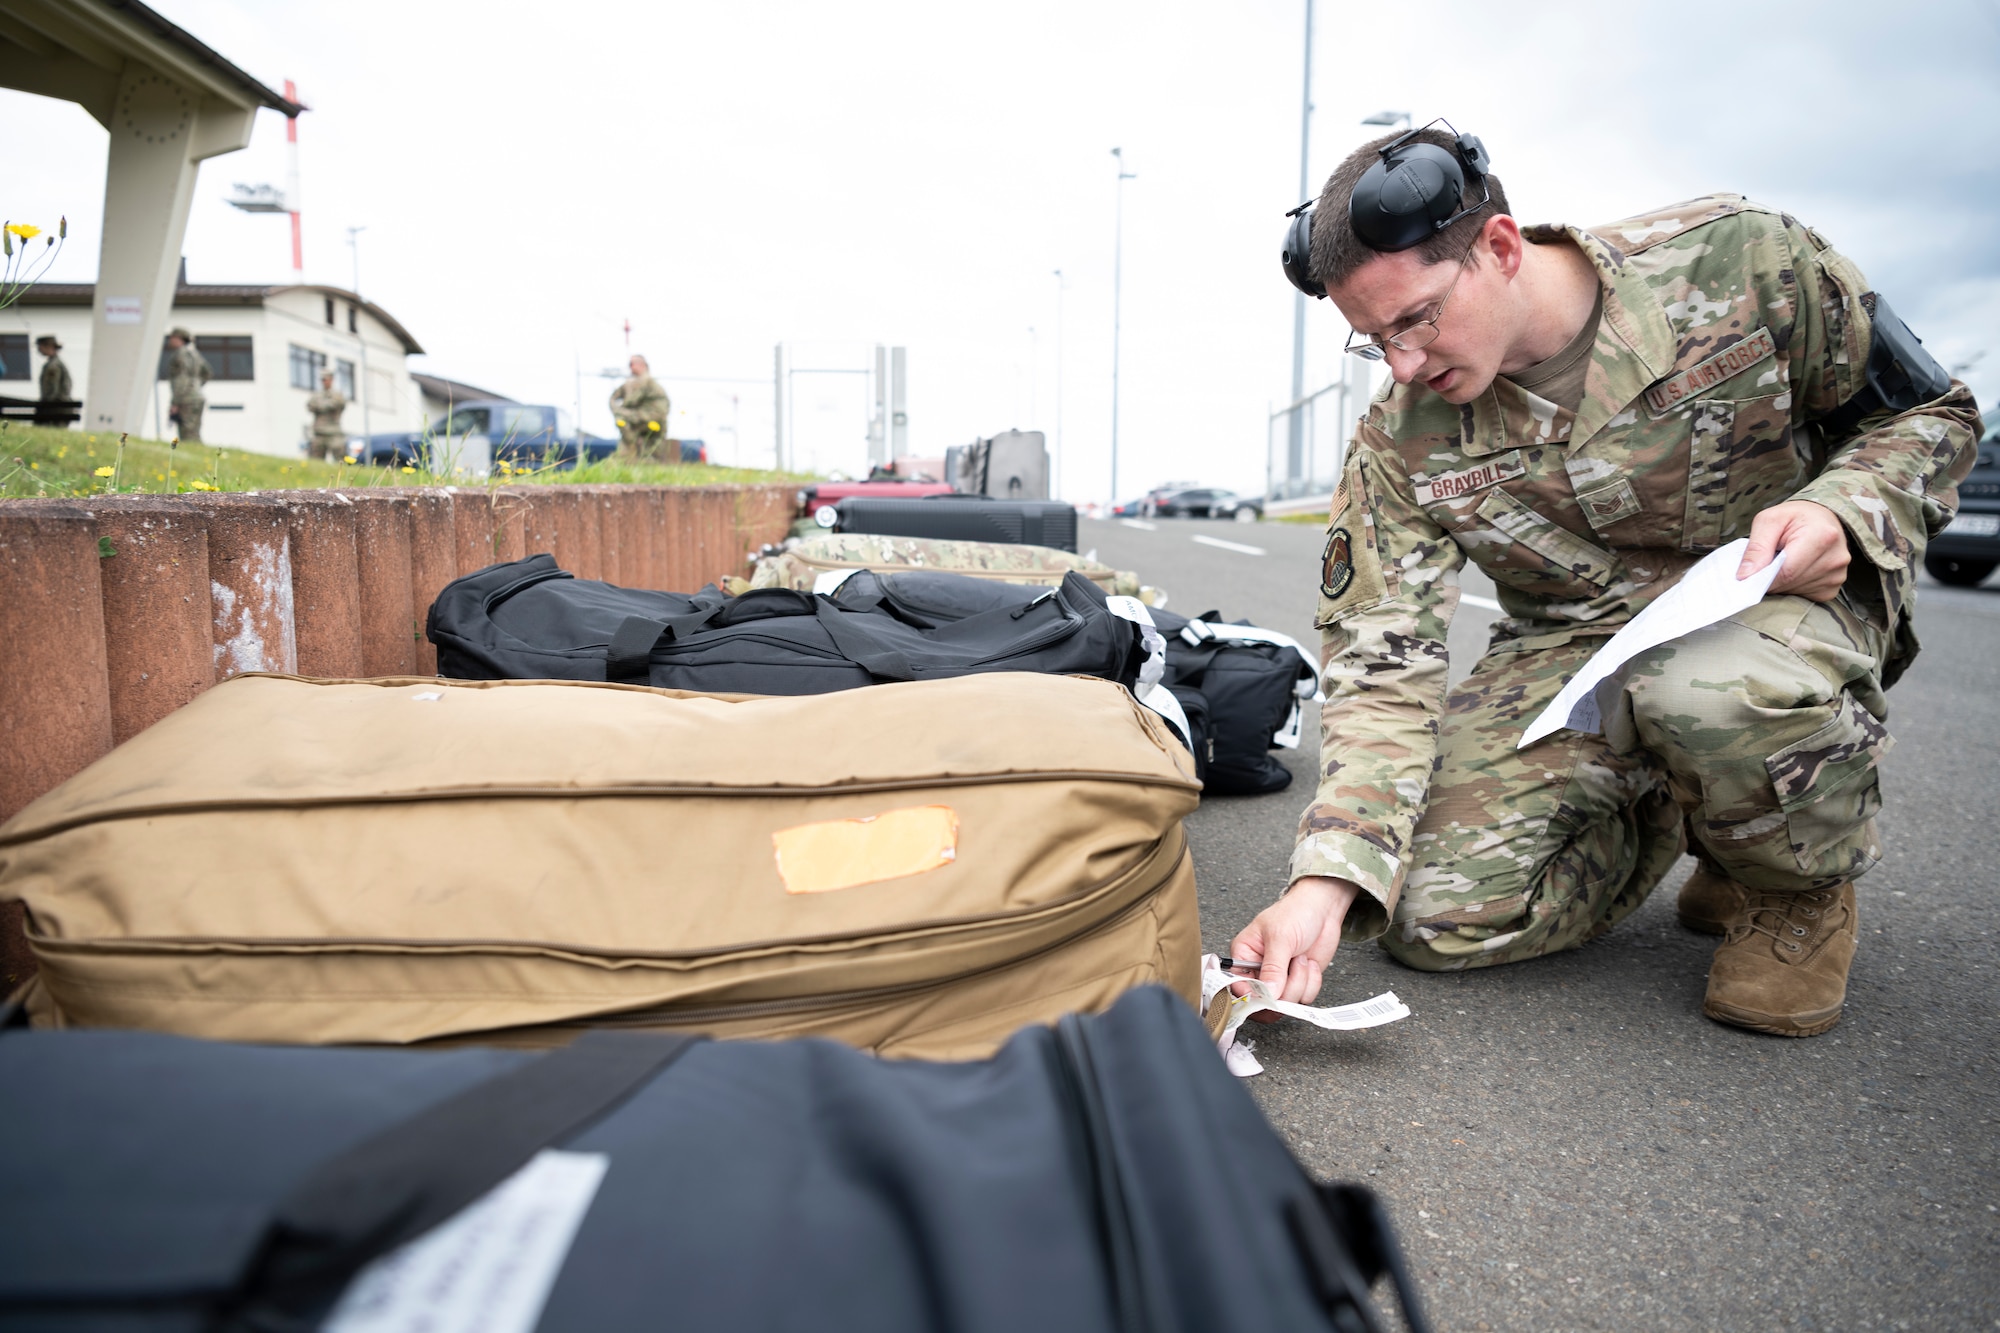 U.S. Air Force Staff Sgt. Christopher Graybill, 726th Air Mobility Squadron Air Terminal Operations Center controller, checks ID tags on passenger luggage on Spangdahlem Air Base, Germany, Aug. 23, 2021.